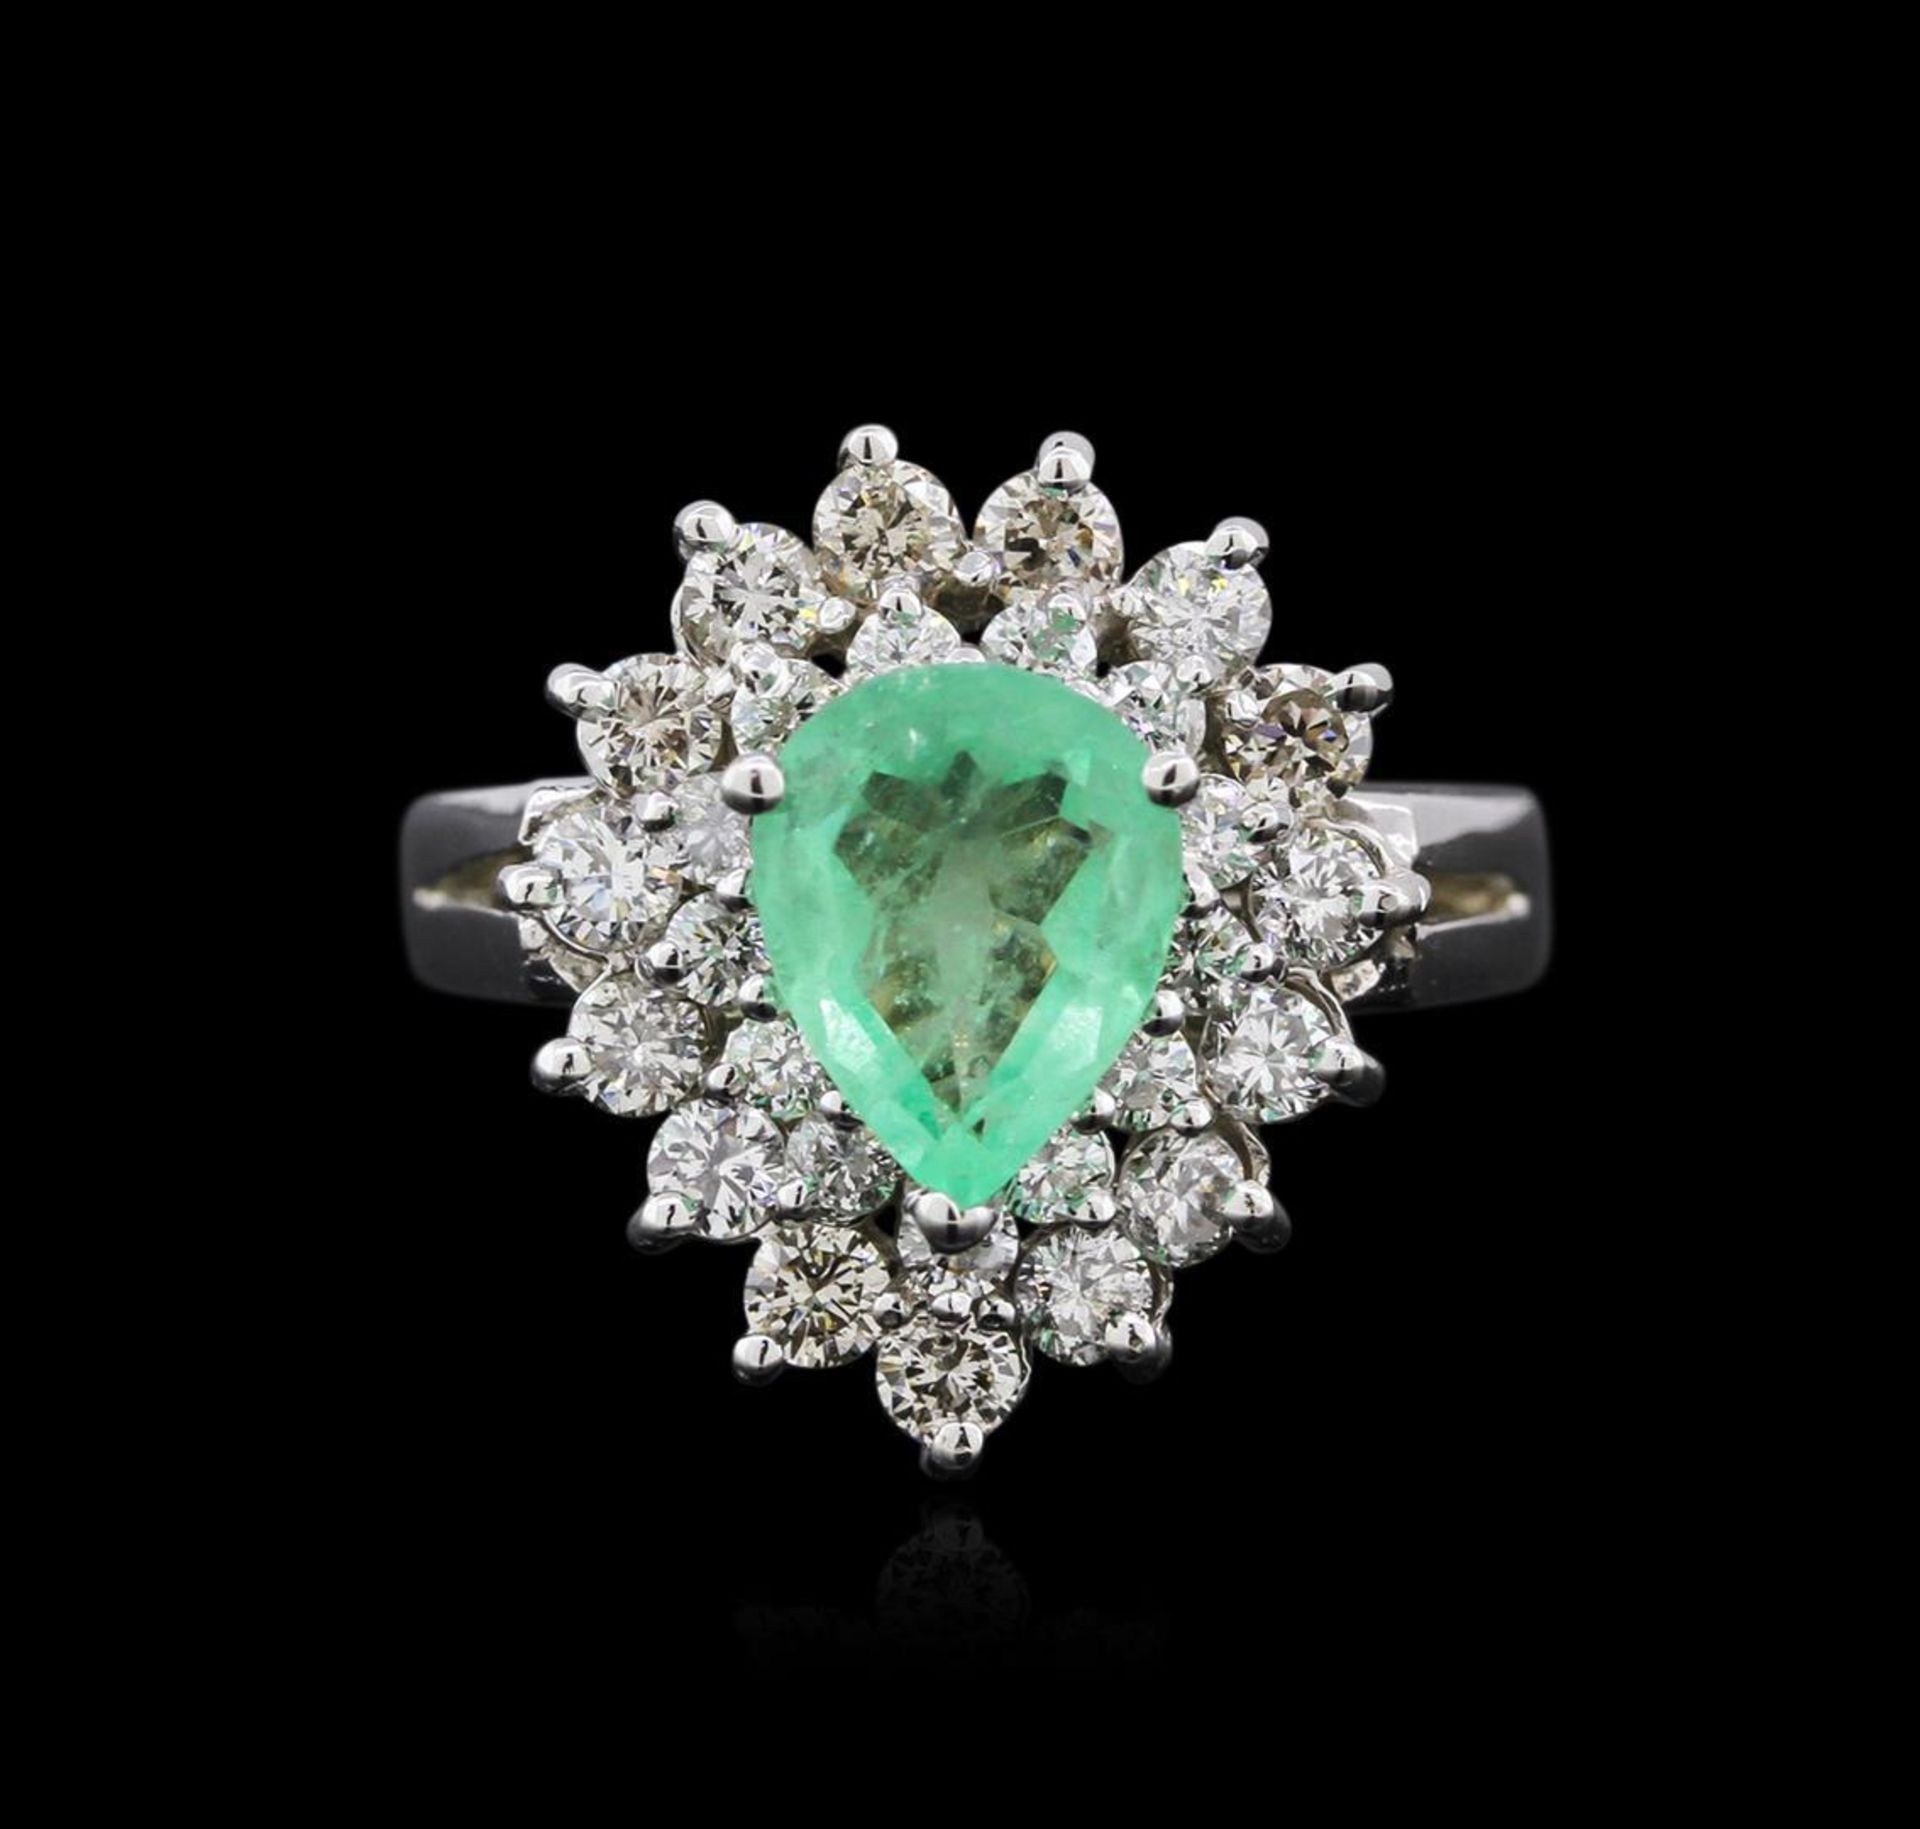 14KT White Gold 1.39 ctw Emerald and Diamond Ring - Image 2 of 4